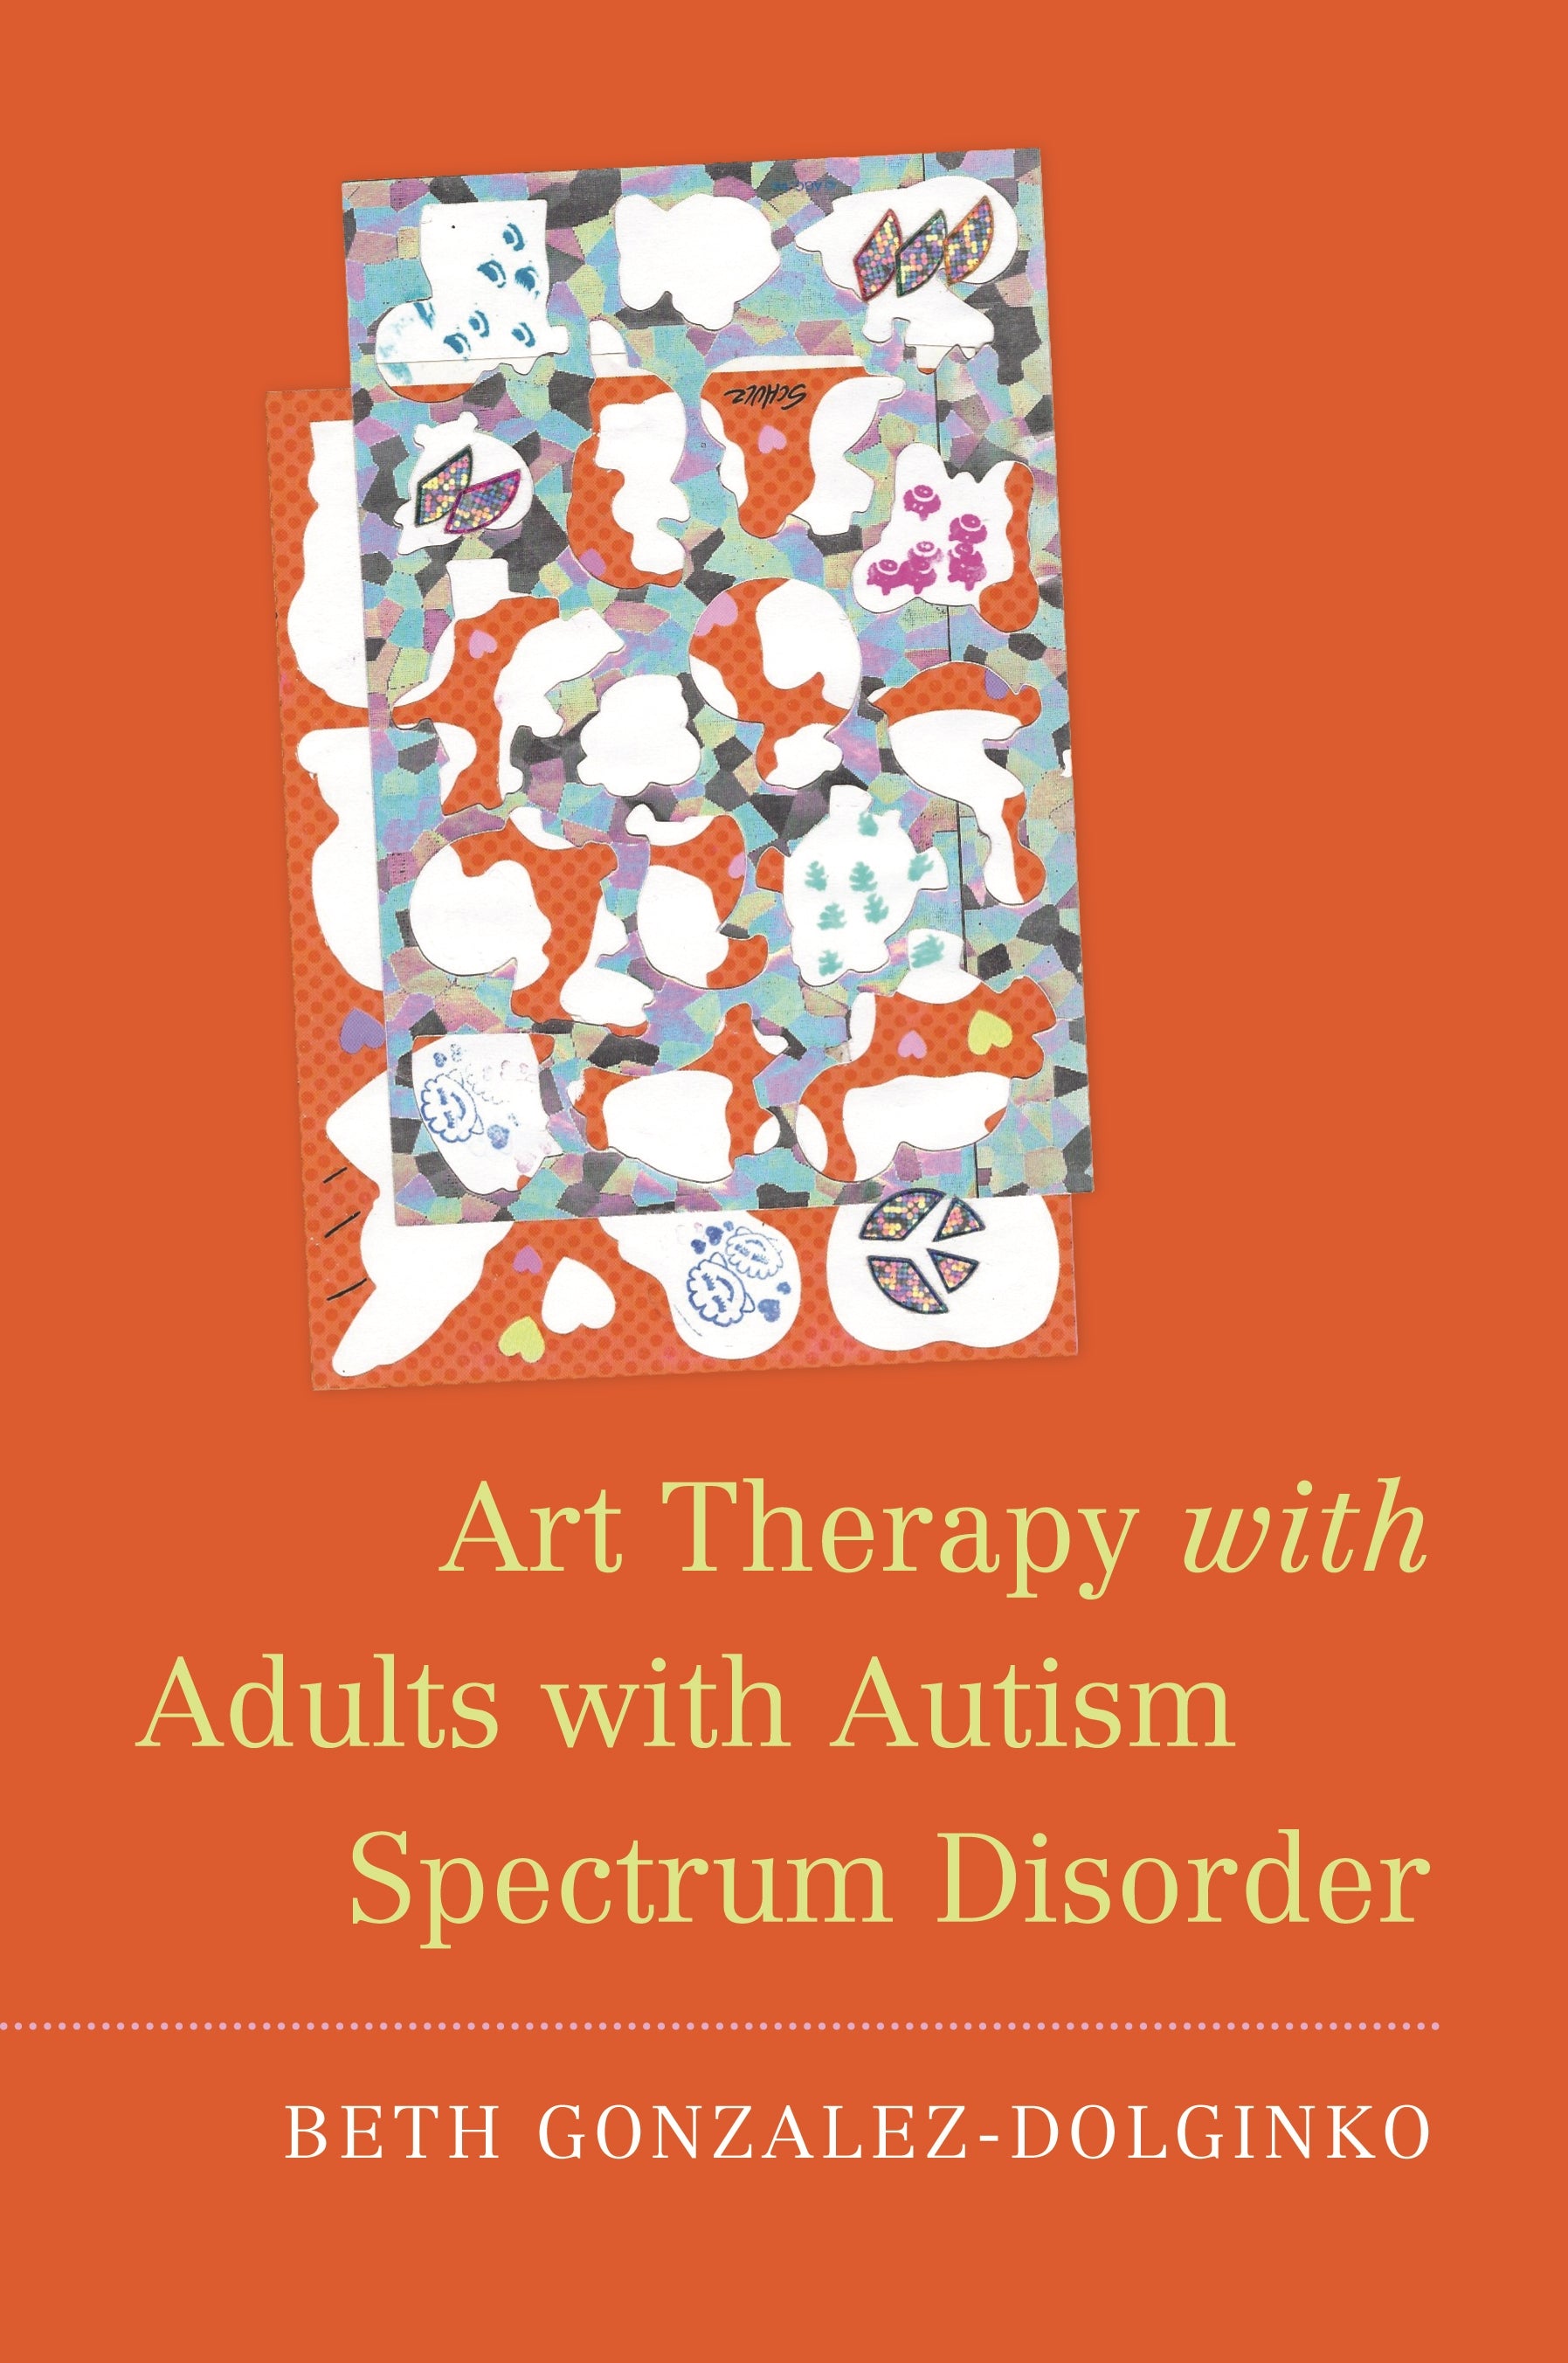 Art Therapy with Adults with Autism Spectrum Disorder by Beth Gonzalez-Dolginko